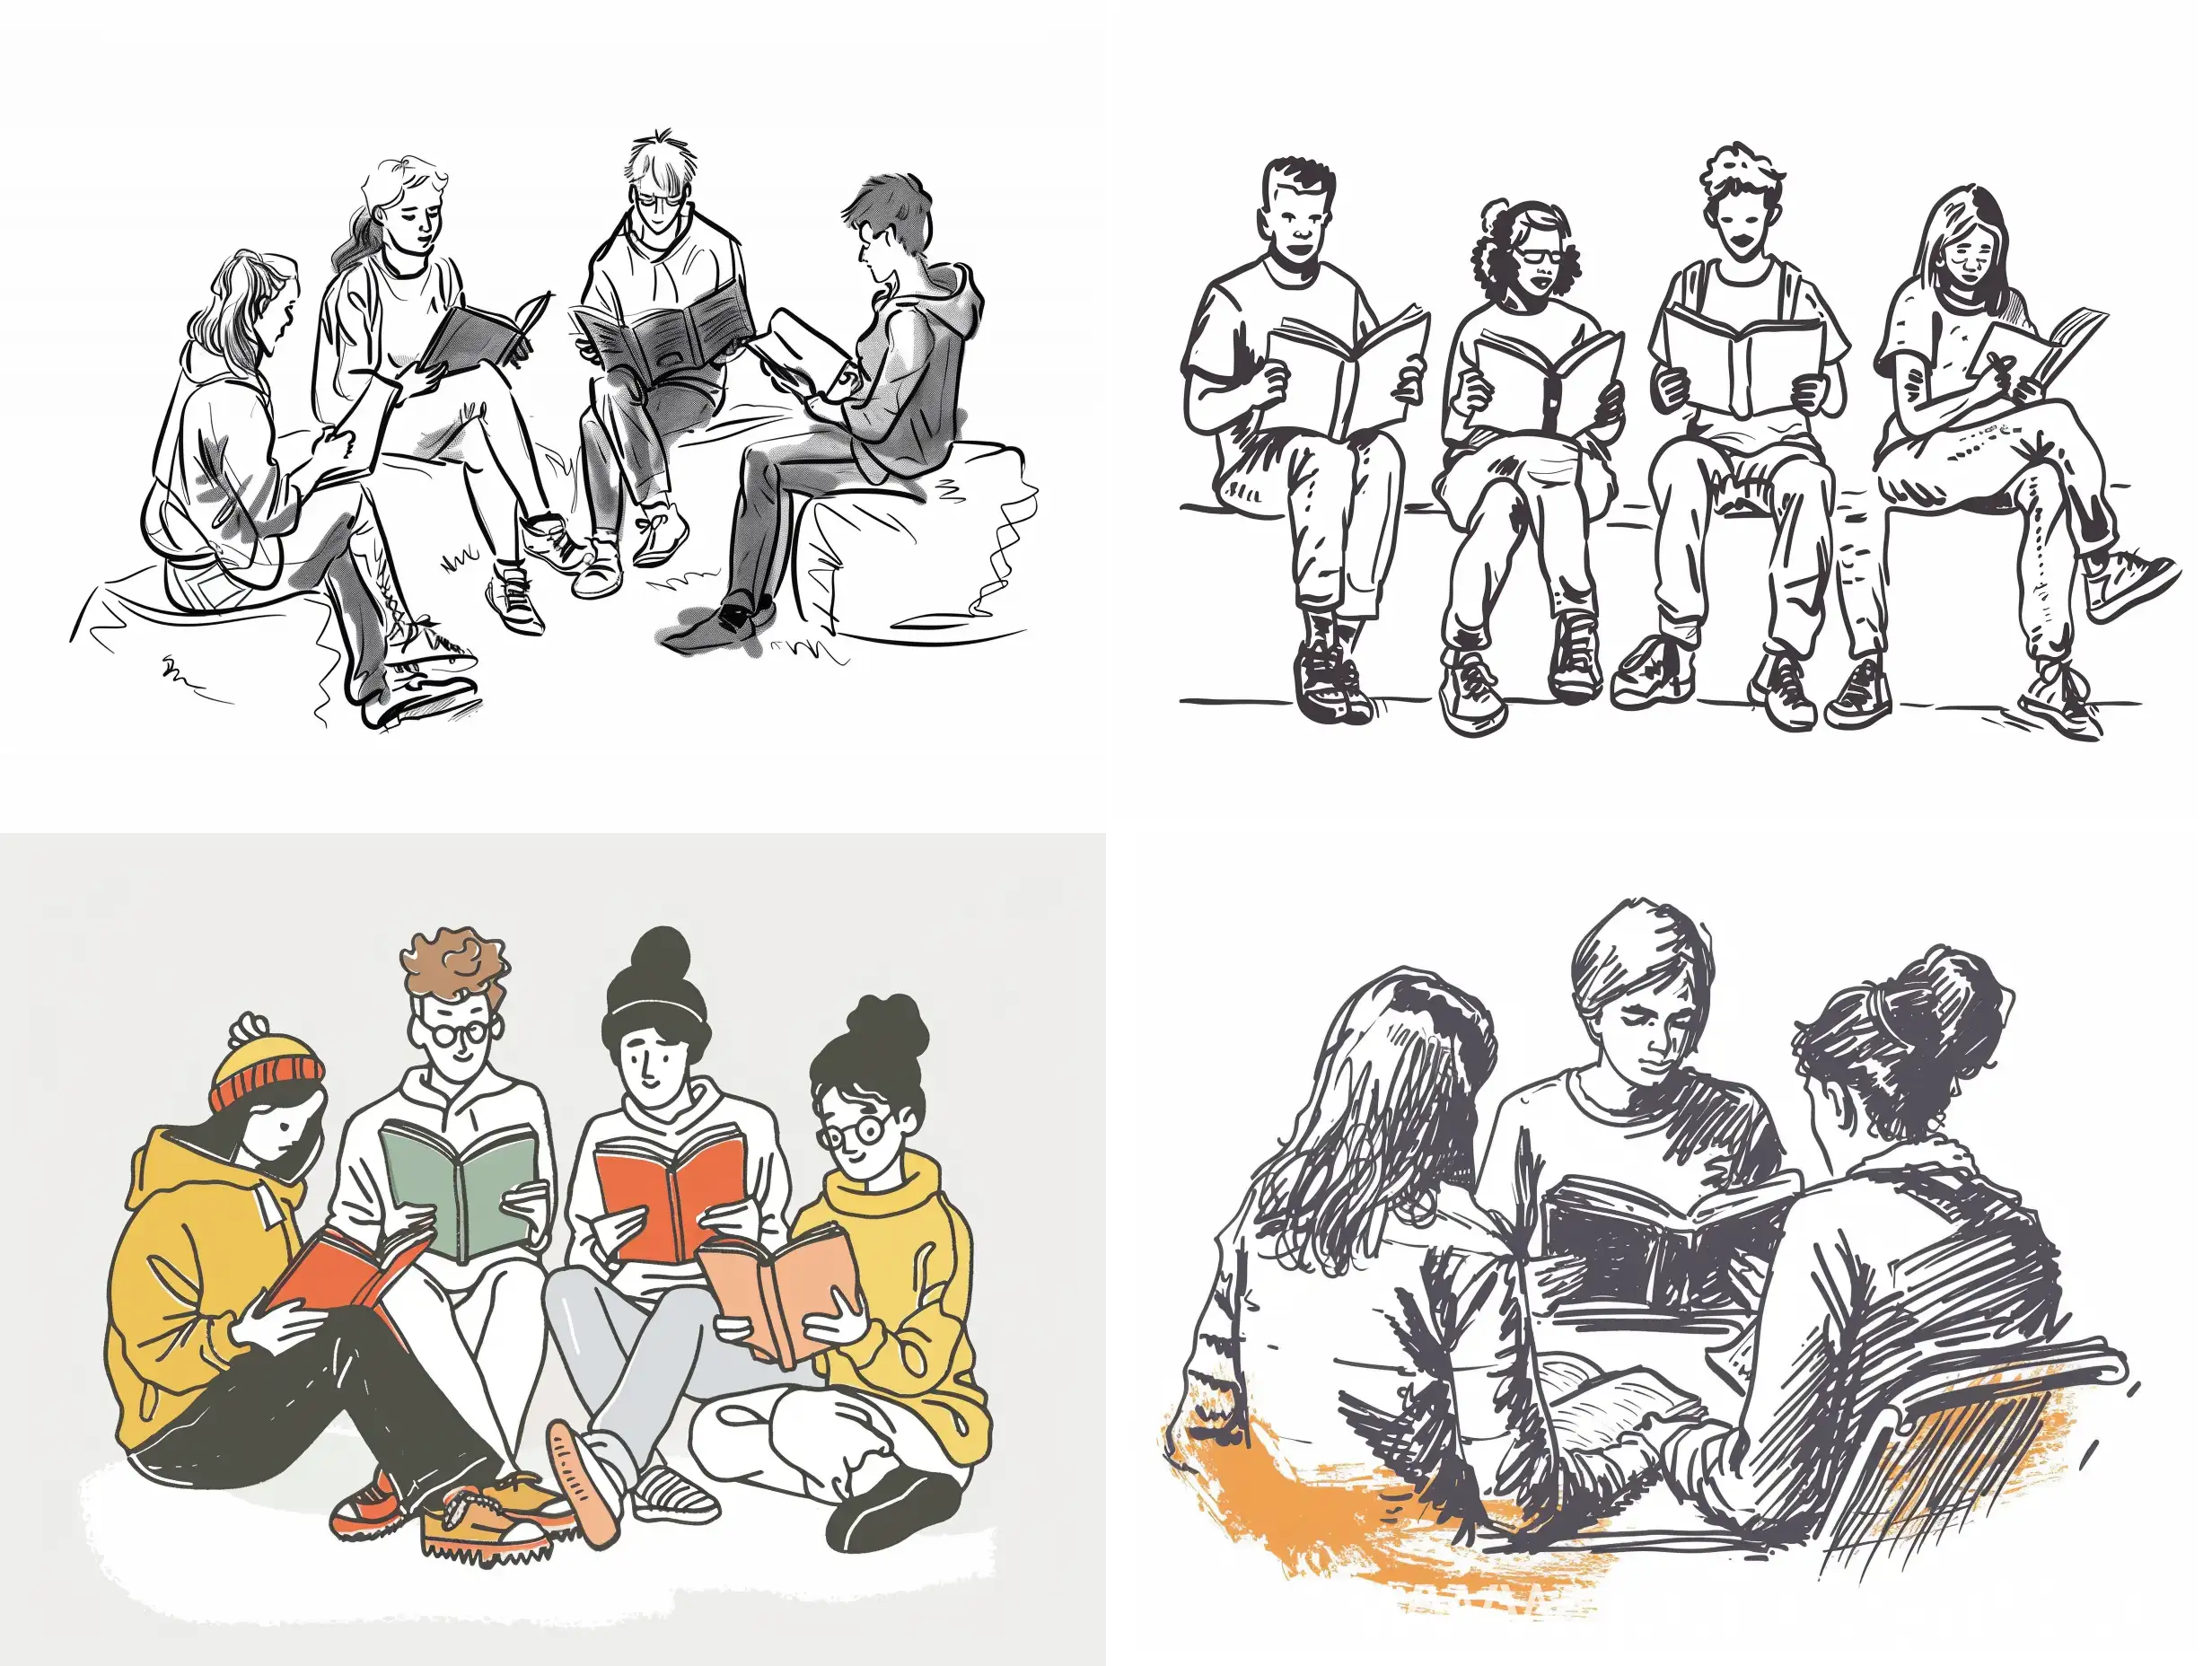 onelinedrawing of people reading books and come together